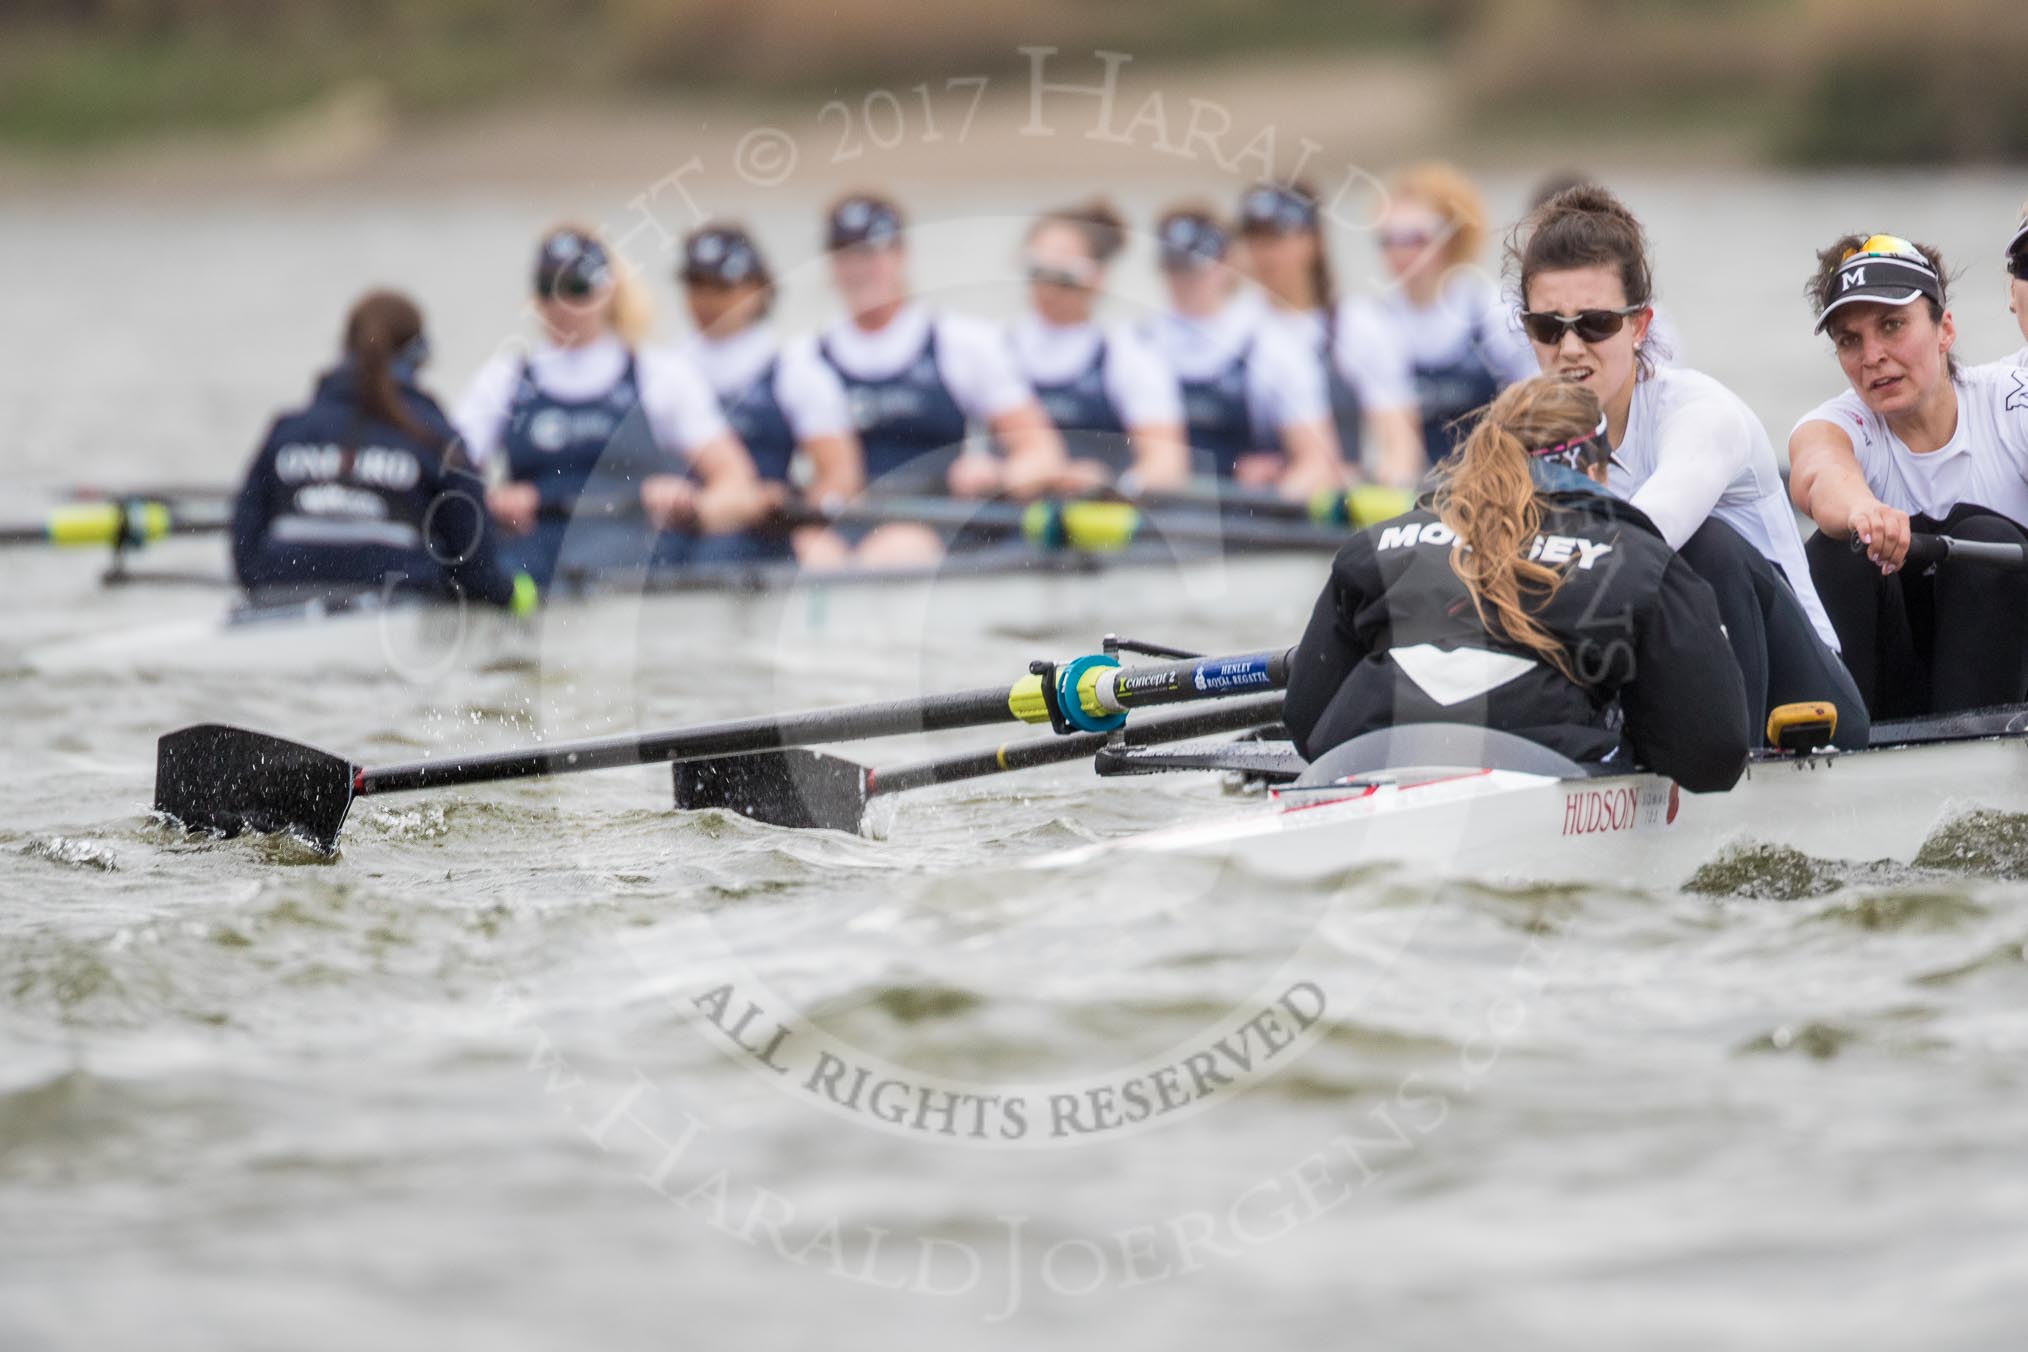 The Cancer Research UK Boat Race season 2017 - Women's Boat Race Fixture OUWBC vs Molesey BC: The Molesey Eight, a bit behind OUWBC - cox Anna Corderoy, stroke Ruth Whyman, 7 Gabriella Rodriguez.
River Thames between Putney Bridge and Mortlake,
London SW15,

United Kingdom,
on 19 March 2017 at 16:09, image #108